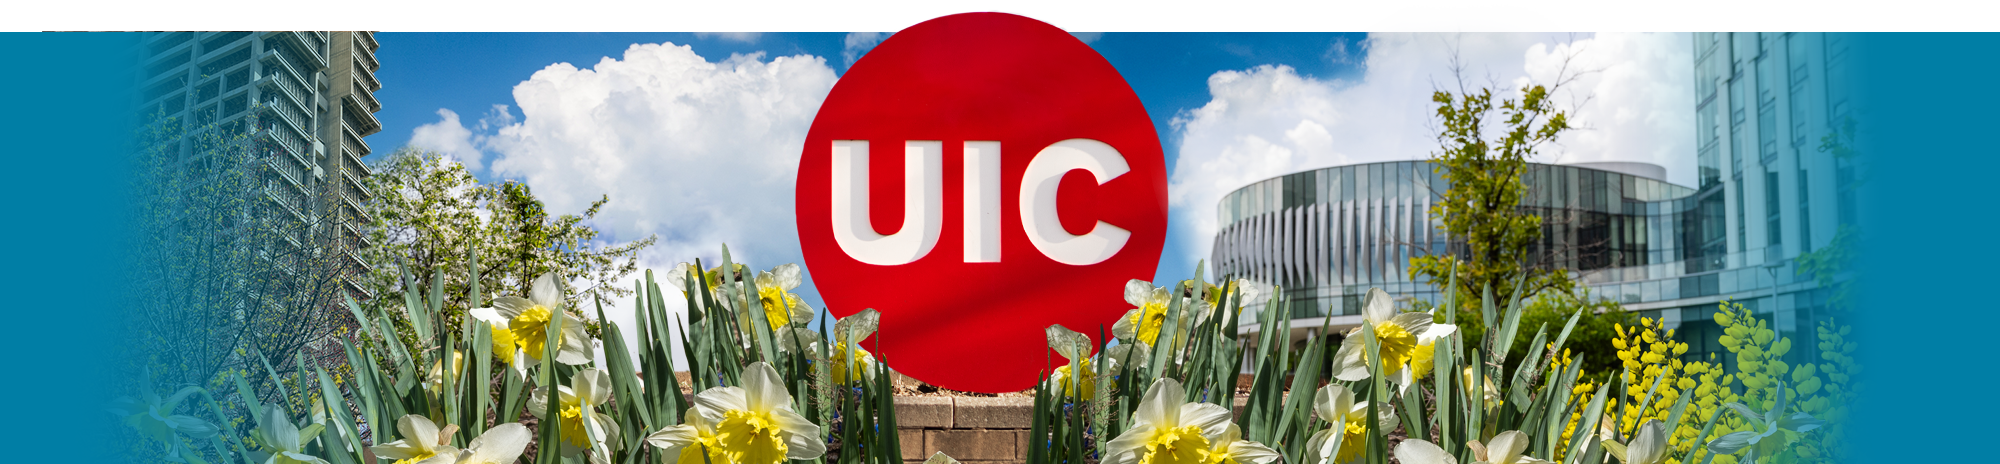 Collage art of UIC Red Dot with florals and campus buildings.